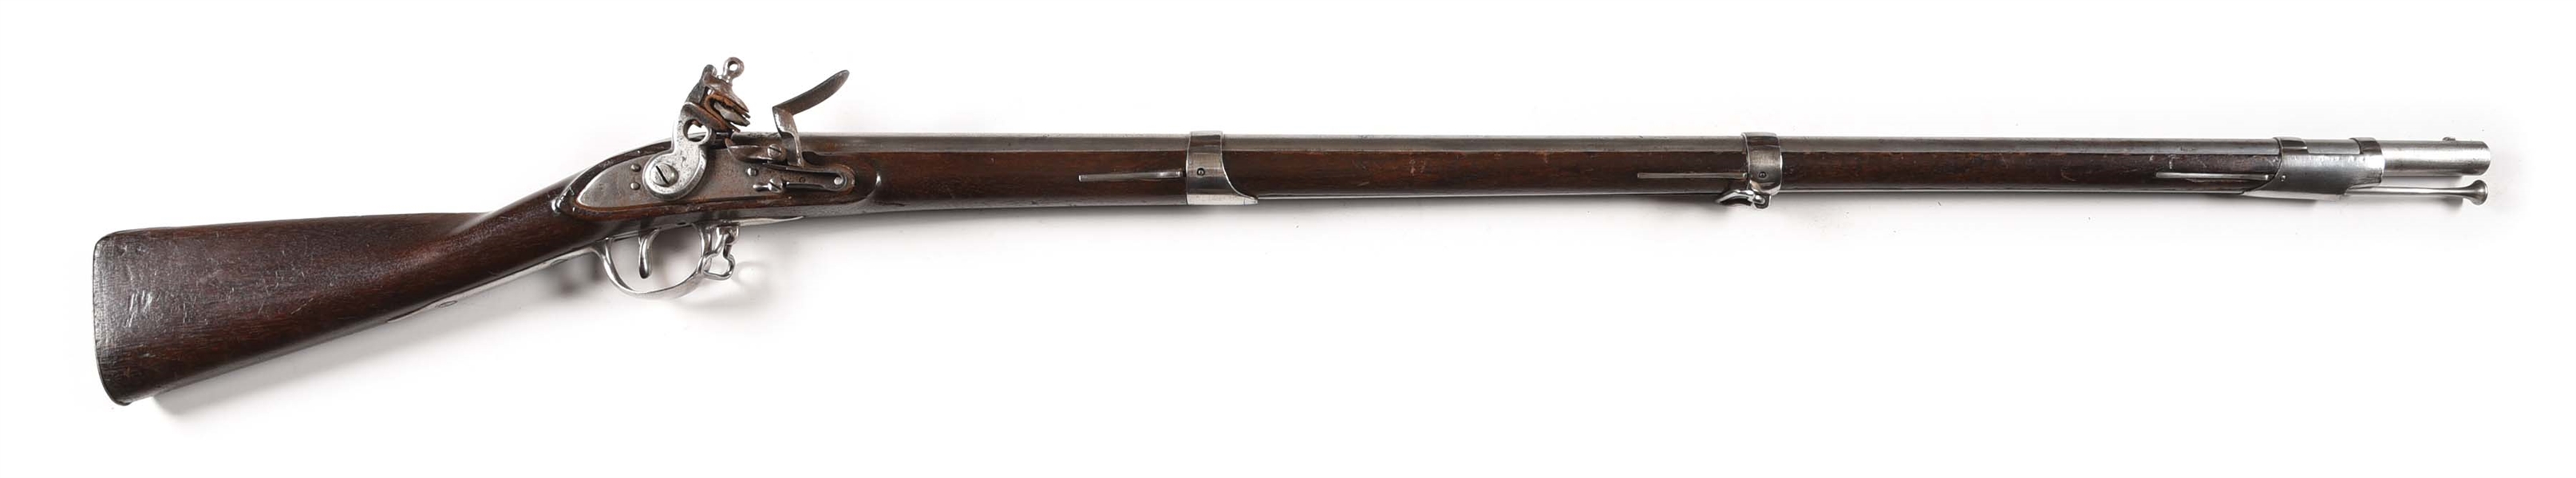 (A) COMPOSITE SECOND MODEL VIRGINIA MANUFACTORY FLINTLOCK MUSKET DATED 1816.